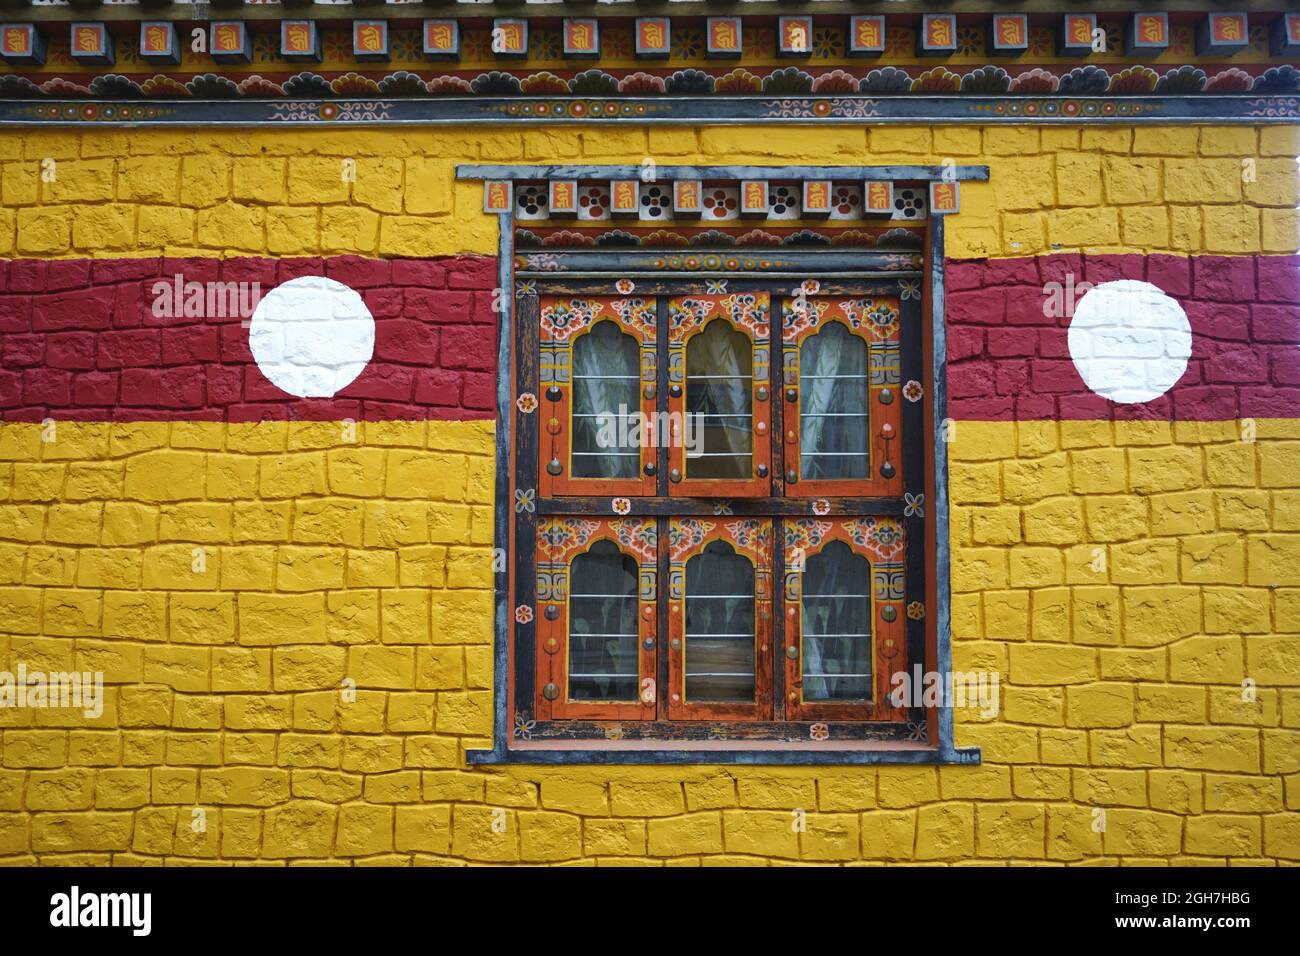 Colorful wall and window at Thangtong Dewachen Dupthop Nunnery, Thimphu, Bhutan. Intricately painted details are typical of Bhutanese architecture. Stock Photo